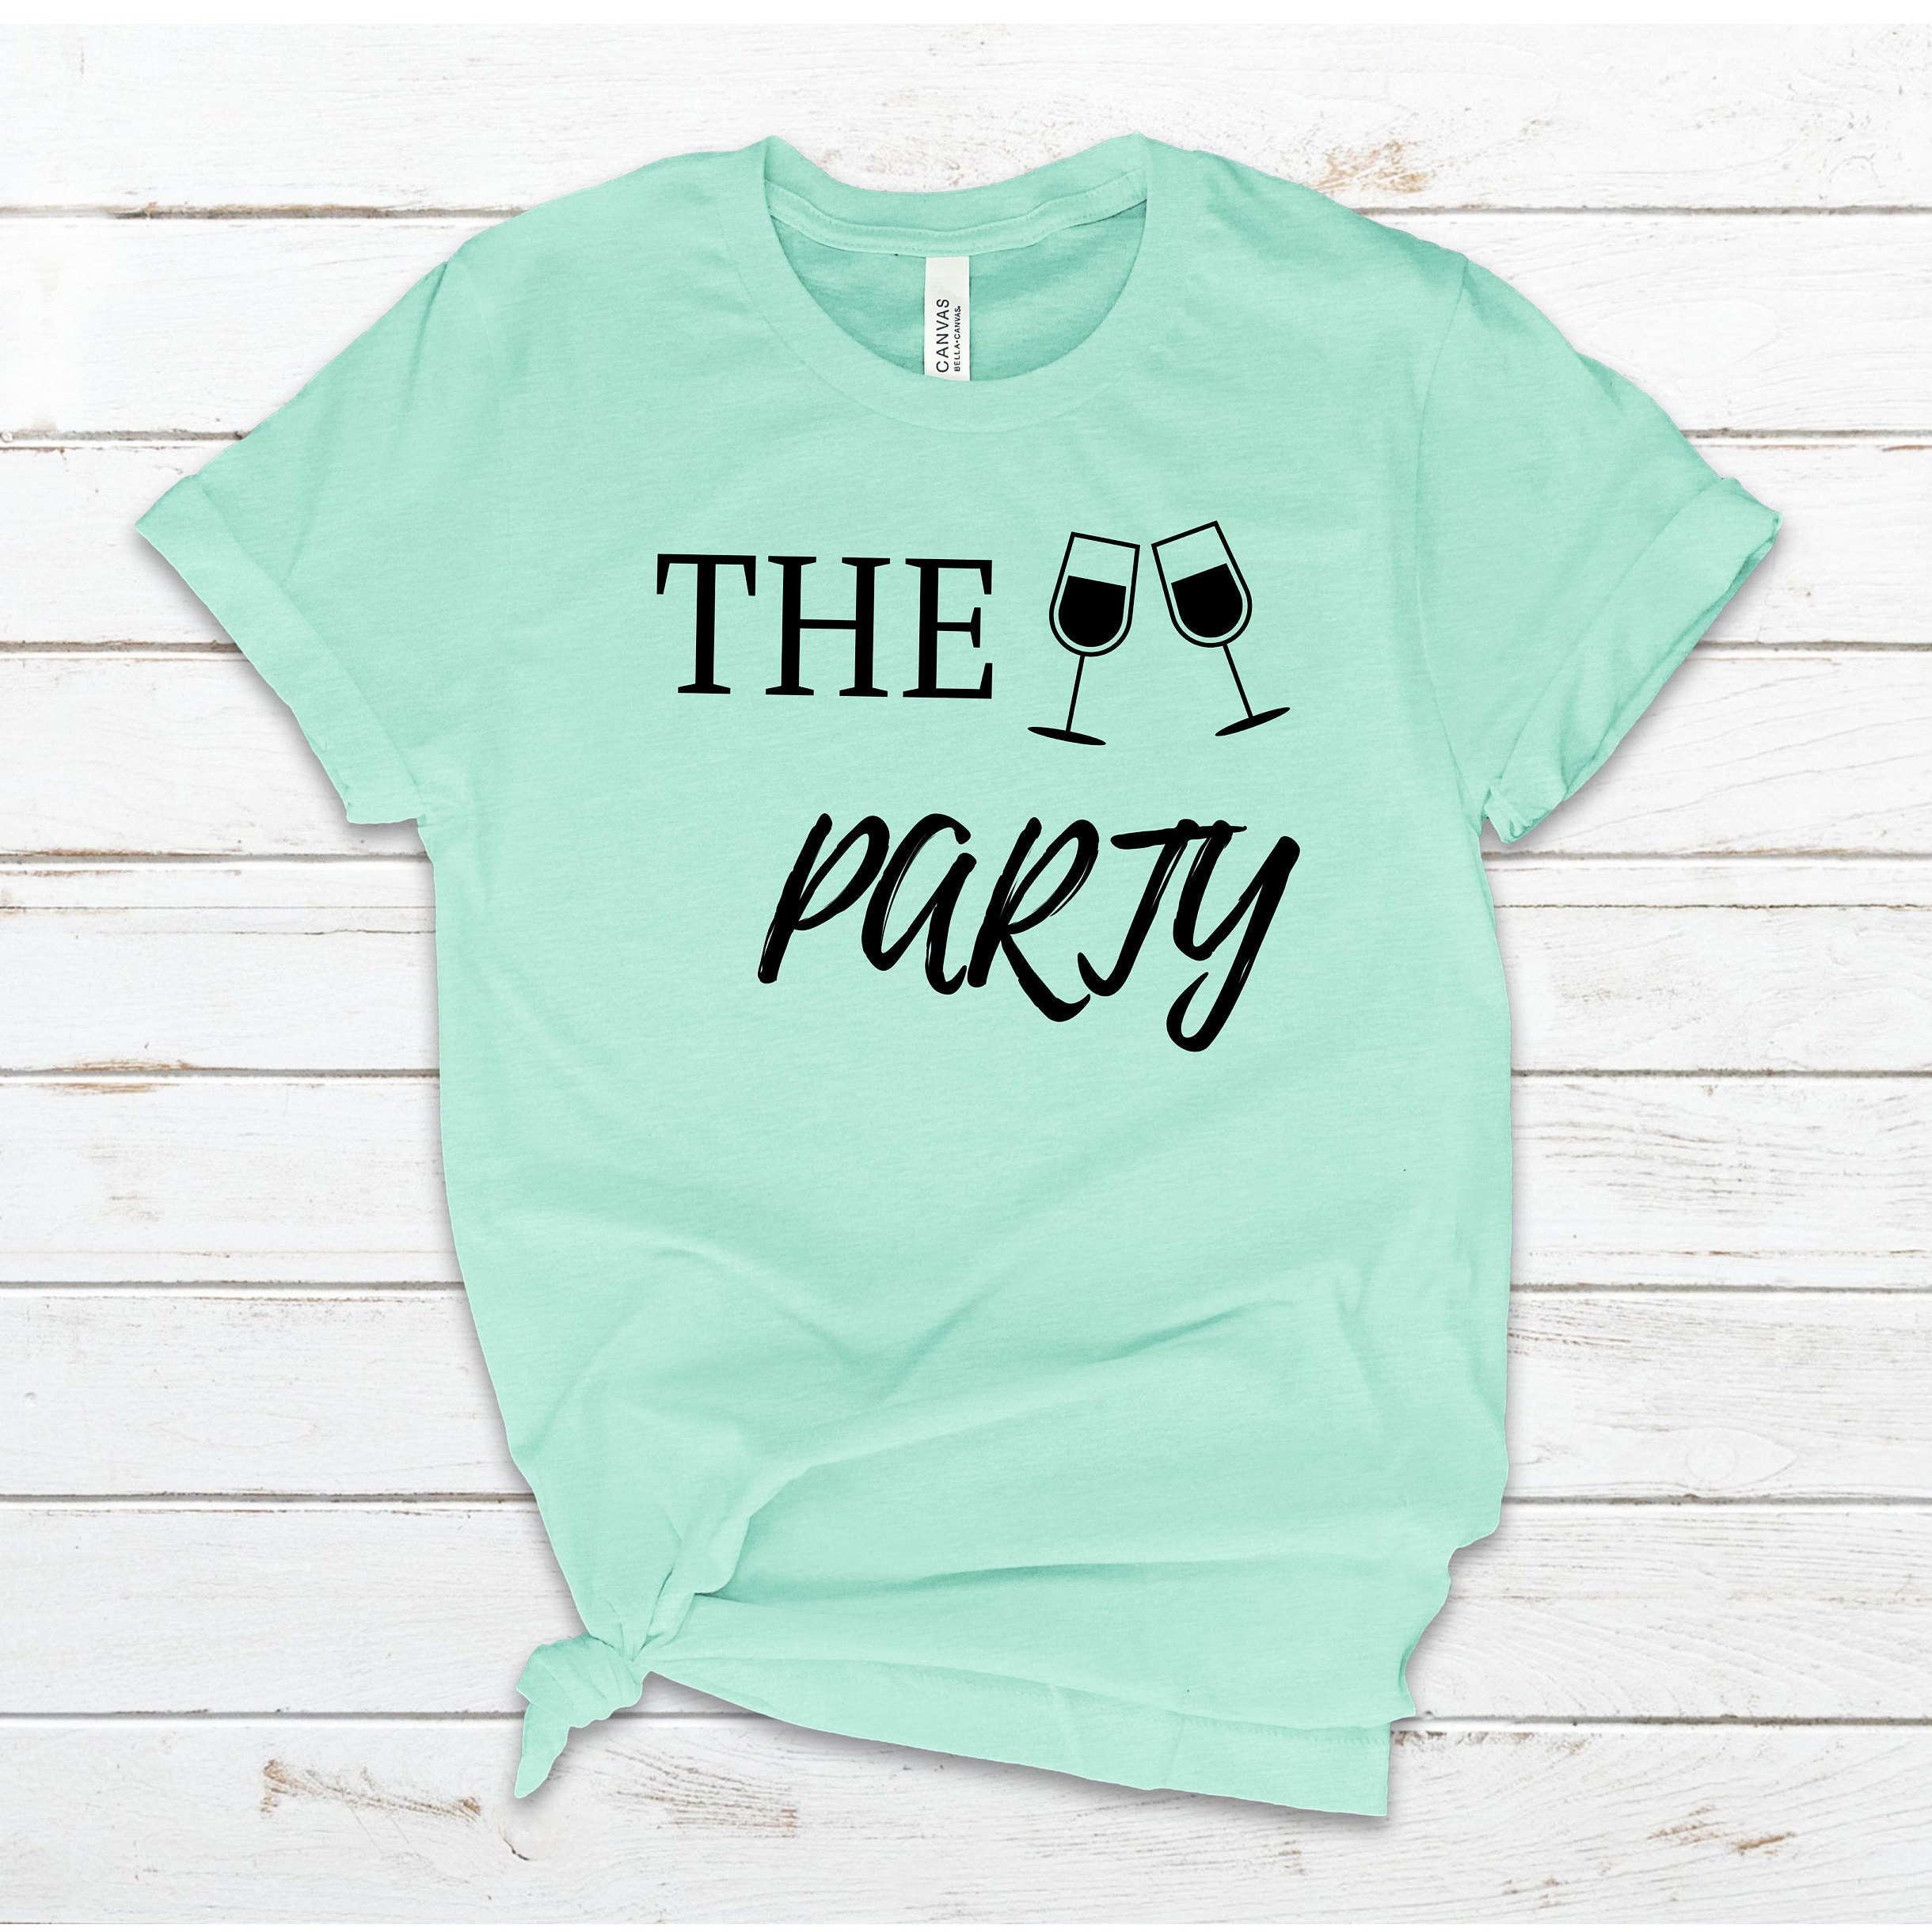 Wife of the Party Tees Bachelorette Party Tees Bridal Party | Etsy